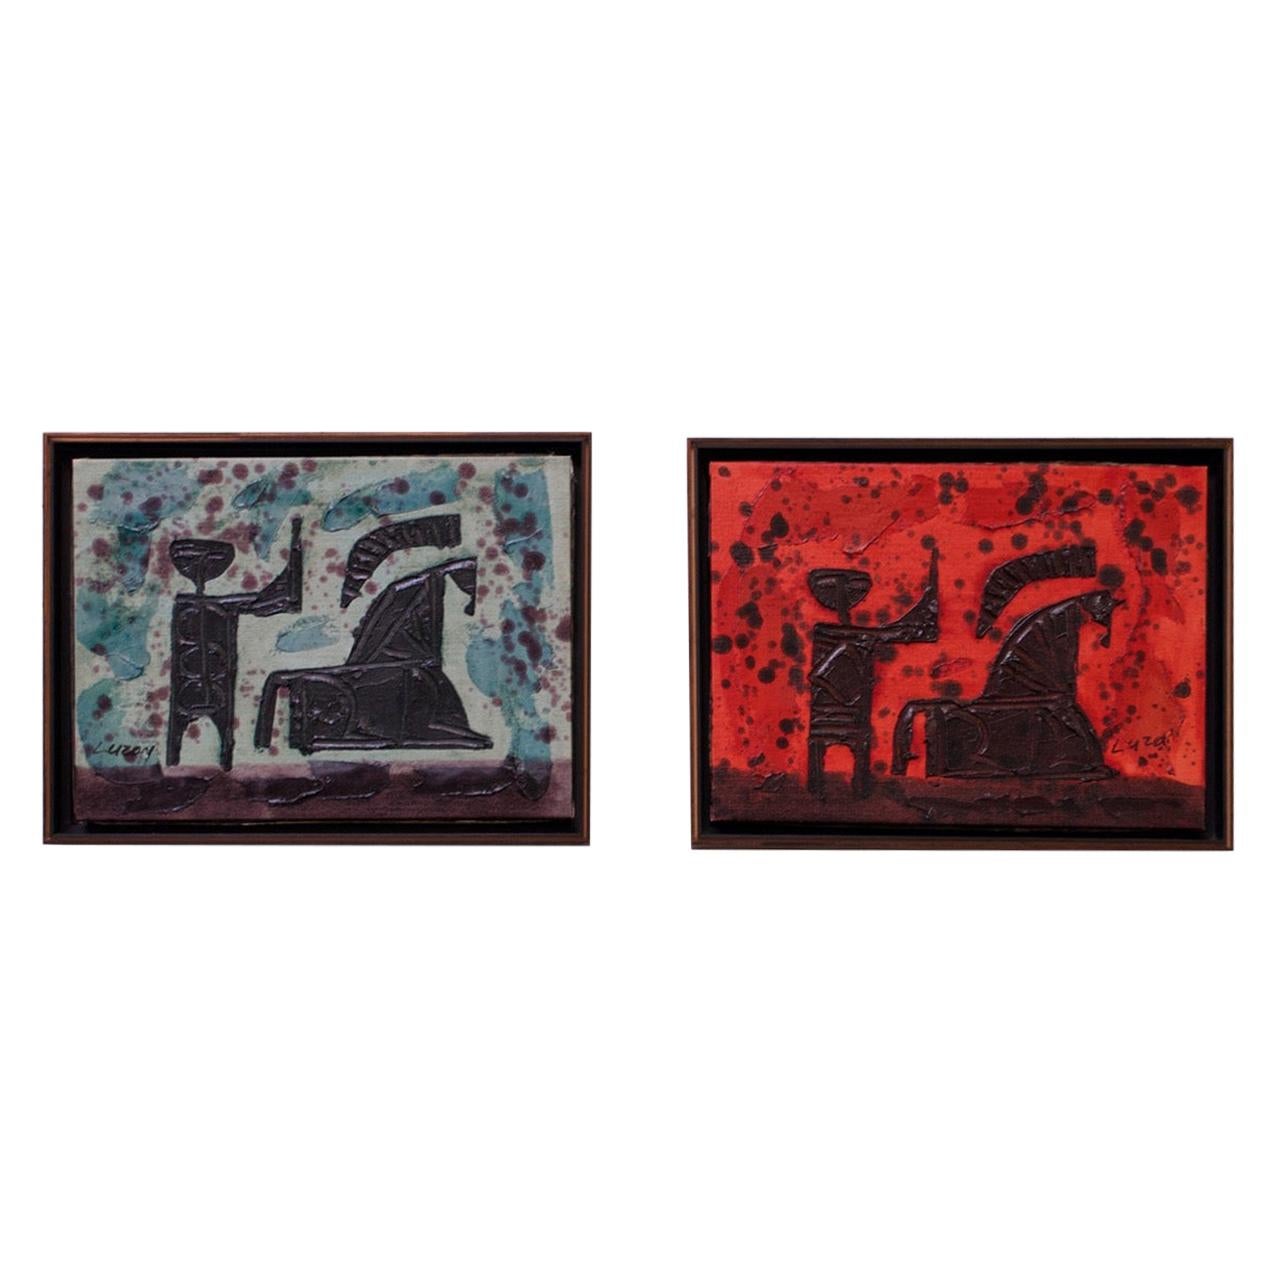 Set of Two 1960s 'Trojan' Impasto Oil on Canvas Paintings by Luzon